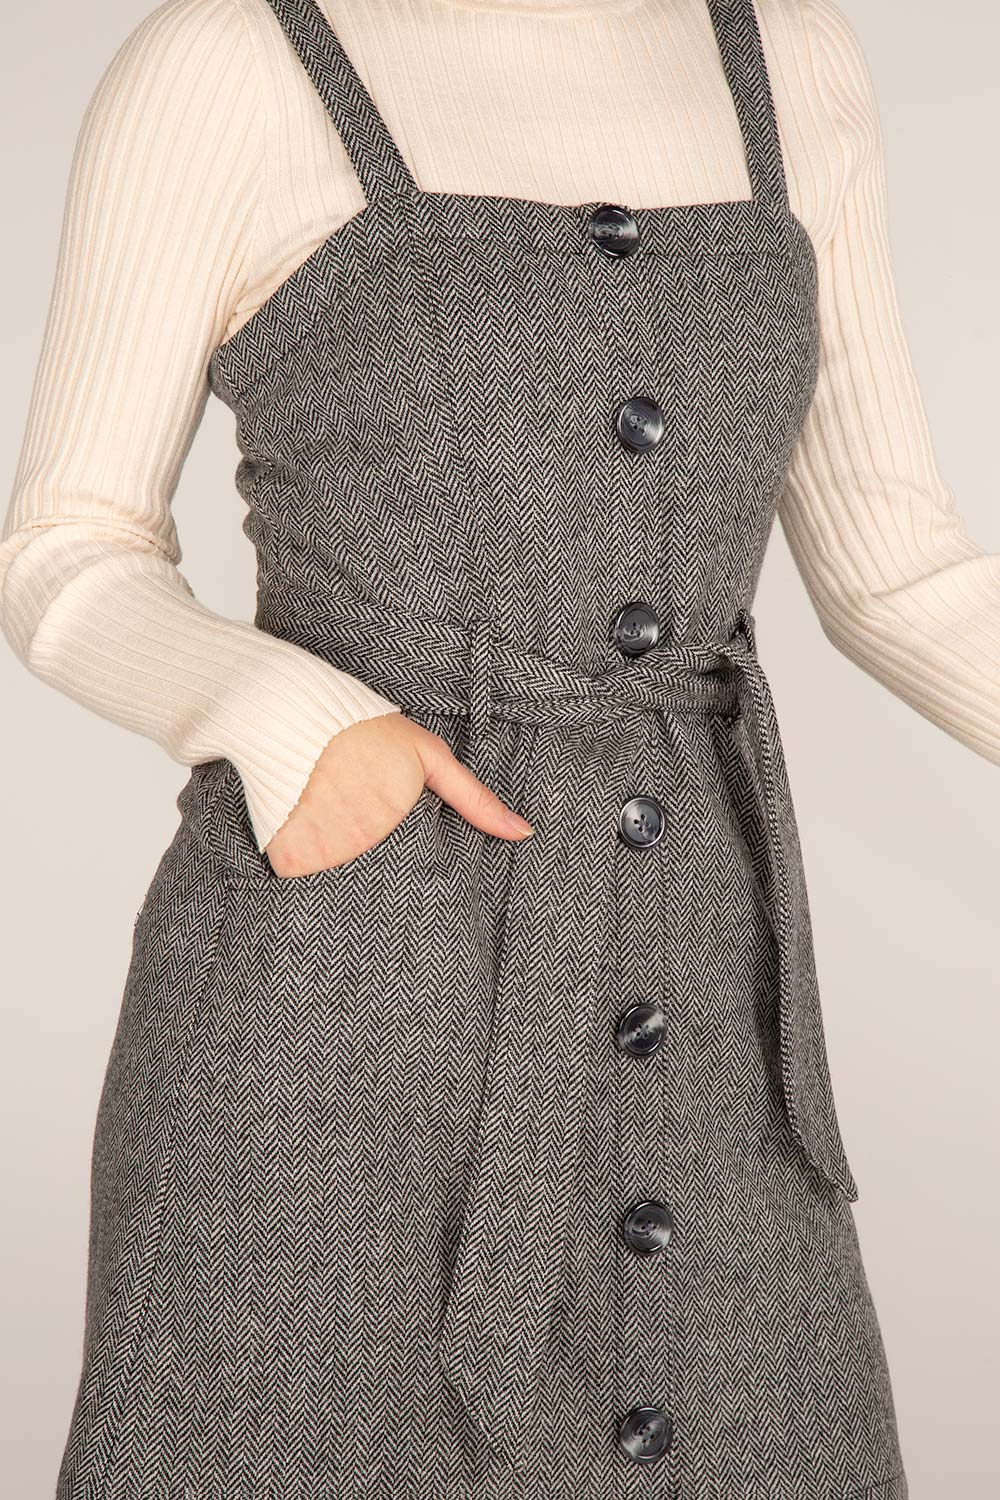 pinafore for ladies